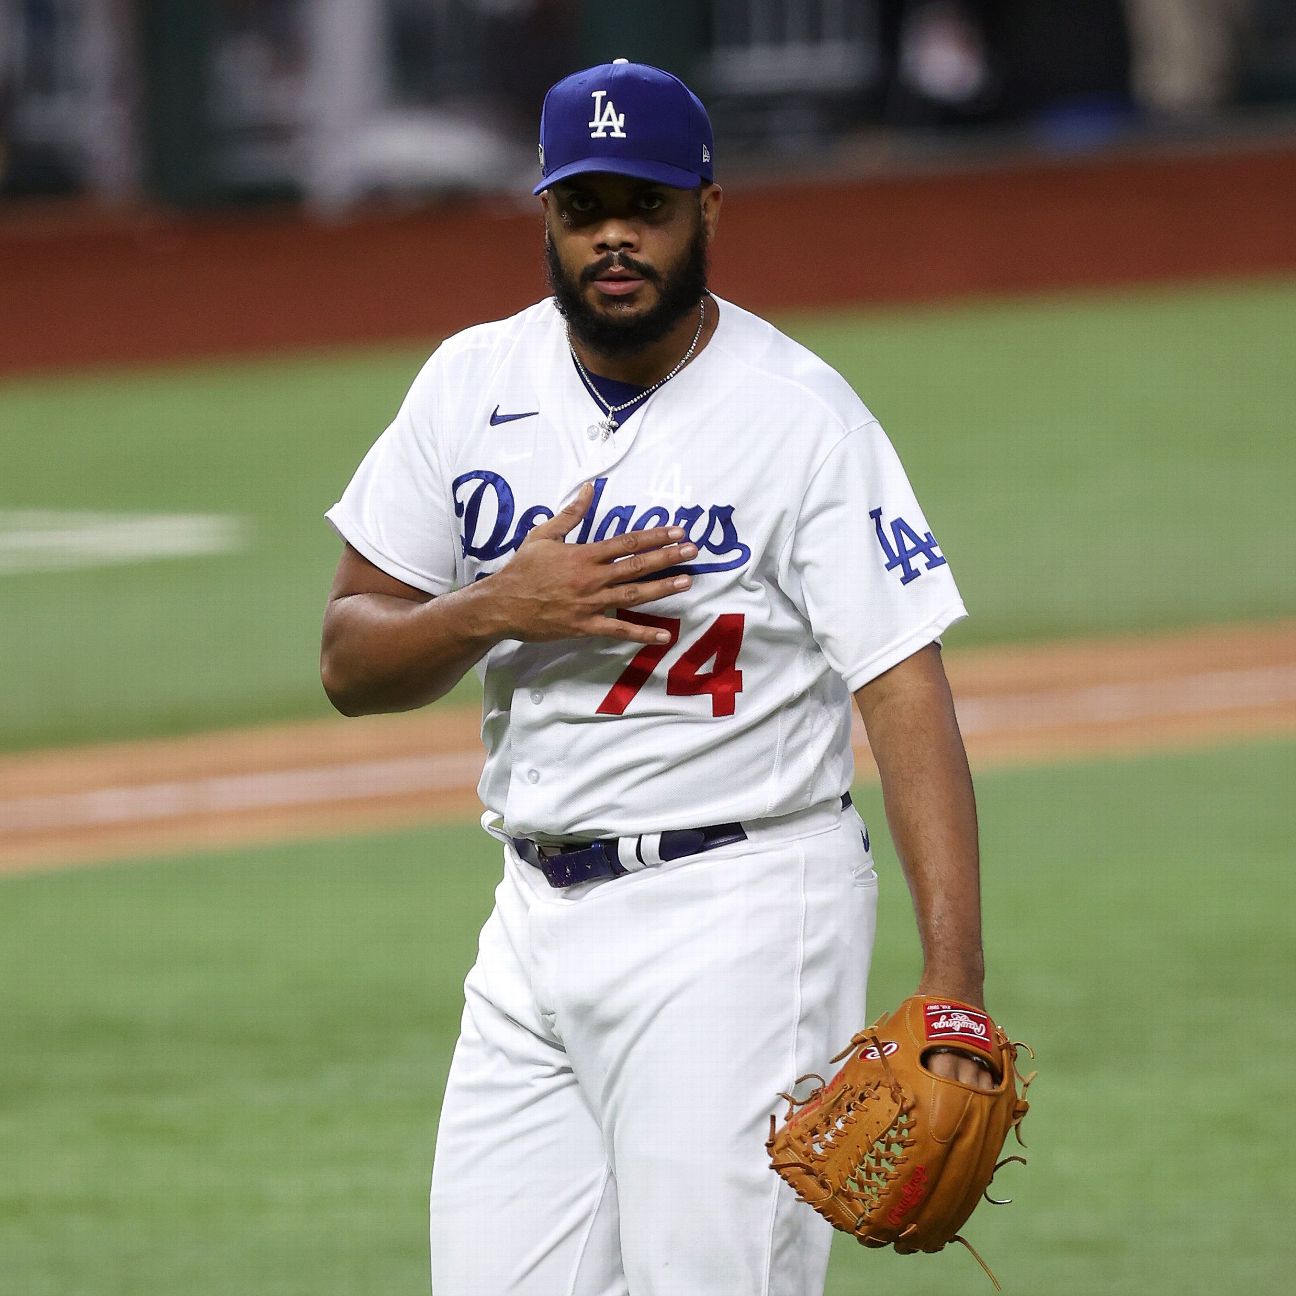 Former Dodgers closer Kenley Jansen has tools to succeed with